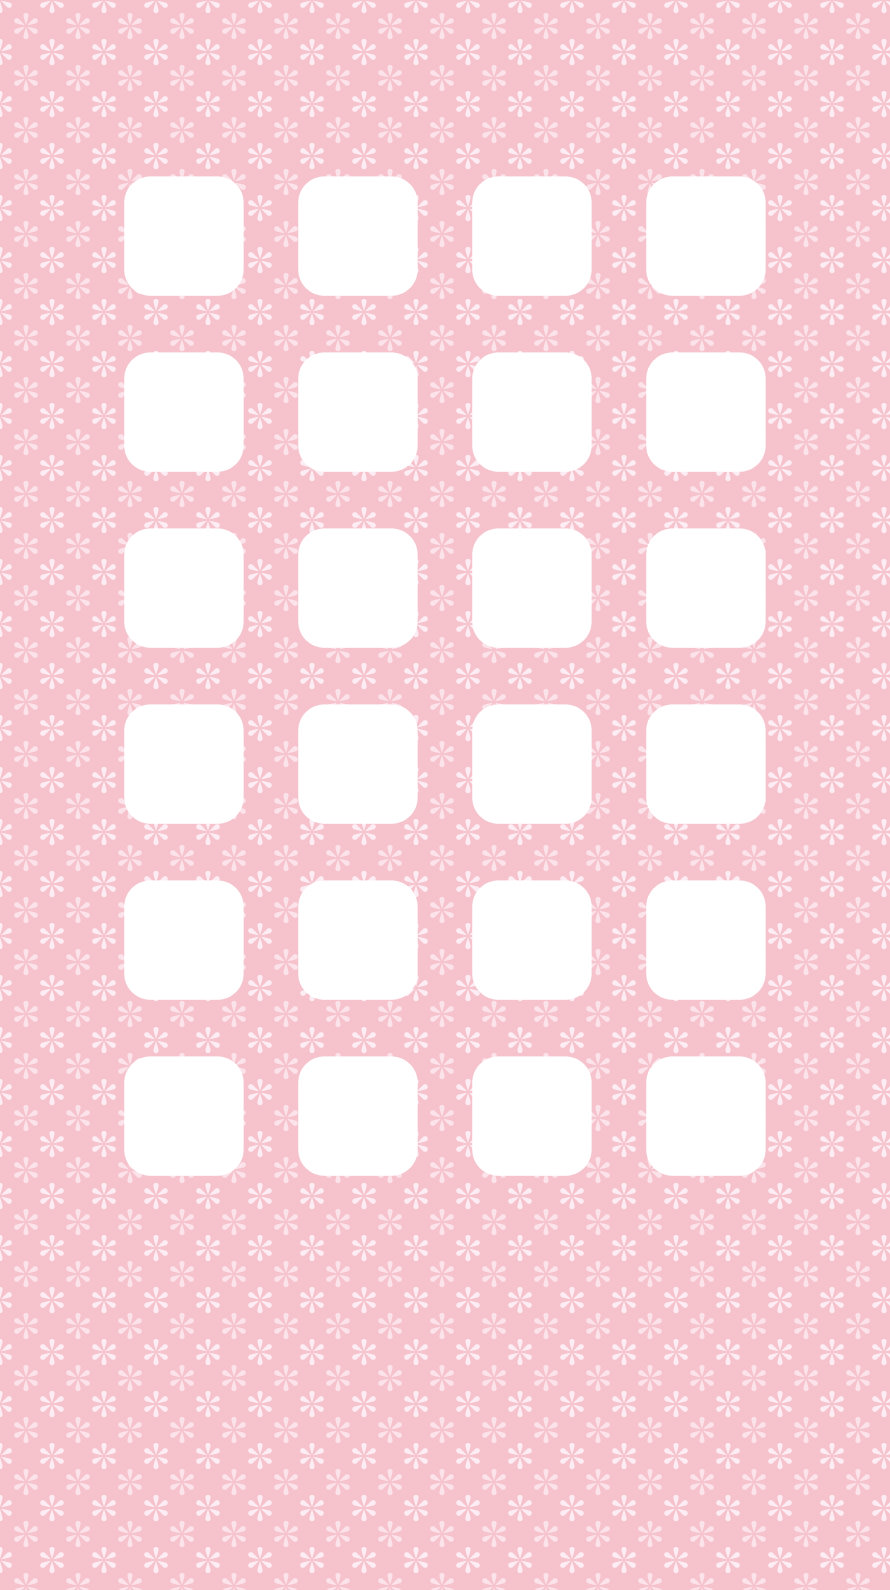 Pattern Flower Pink Girls And Woman For Shelf Wallpaper Sc Iphone6s